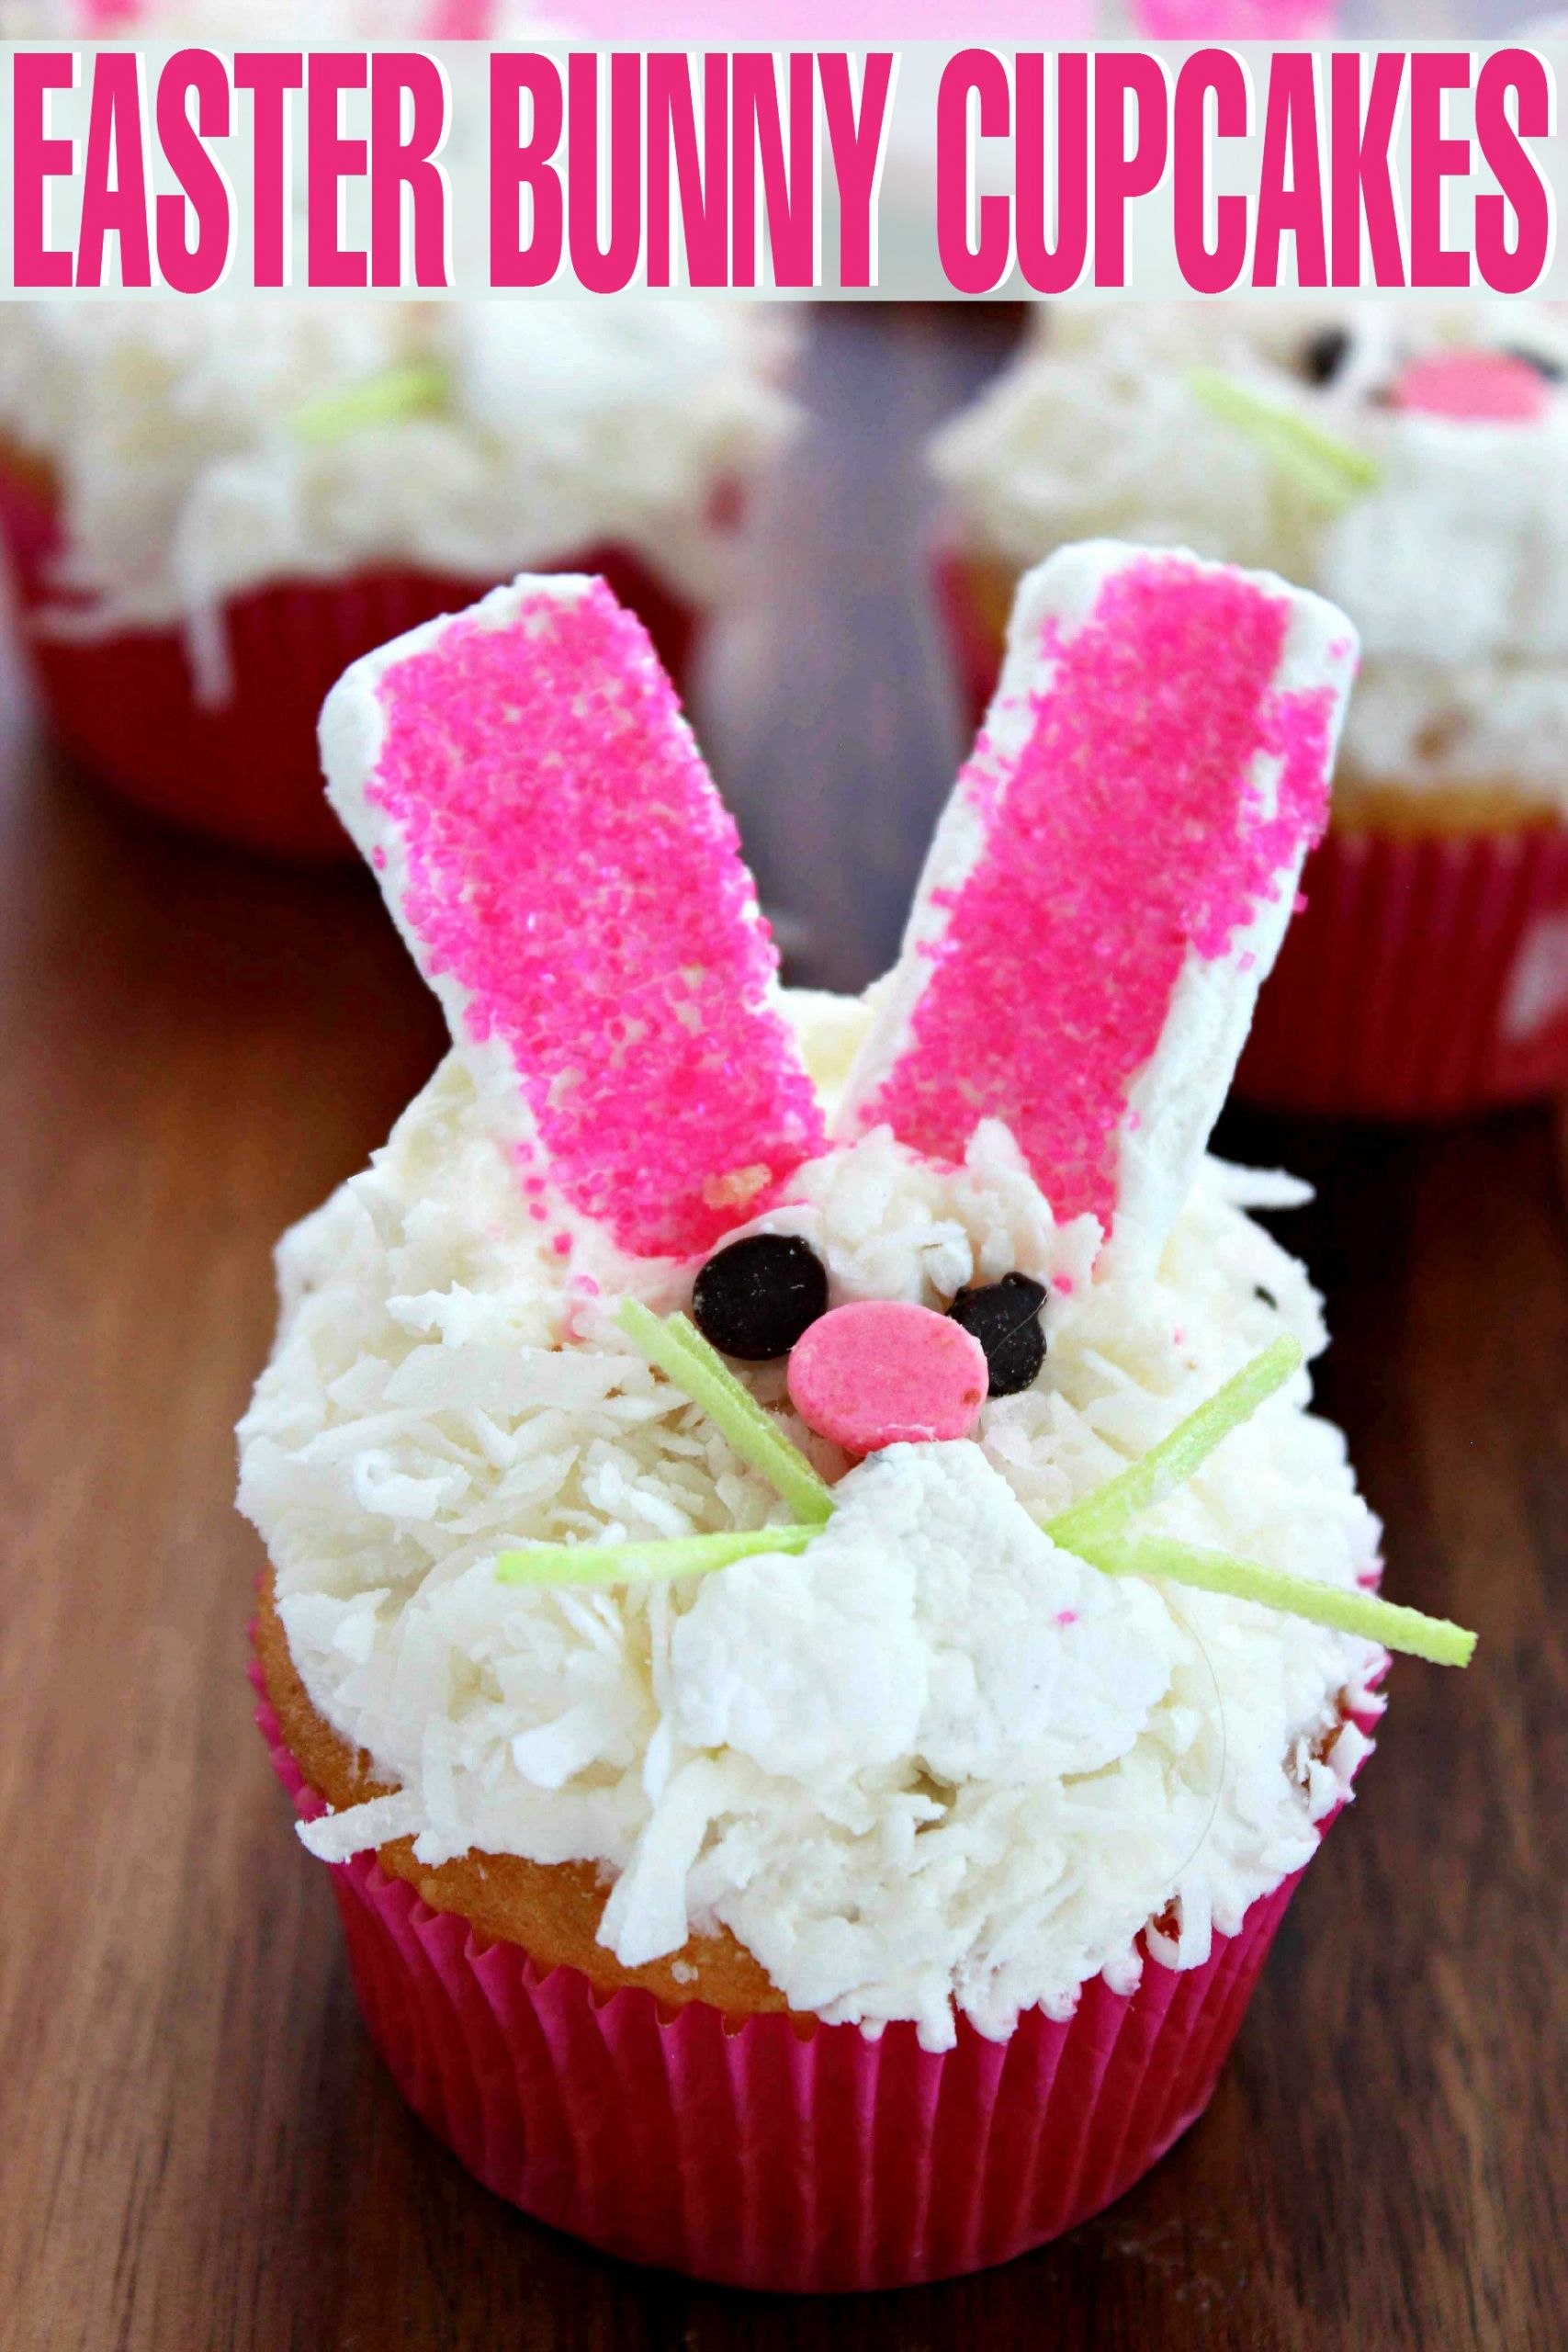 Easy Easter Cupcakes
 Easy Easter Bunny Cupcakes Baking Beauty